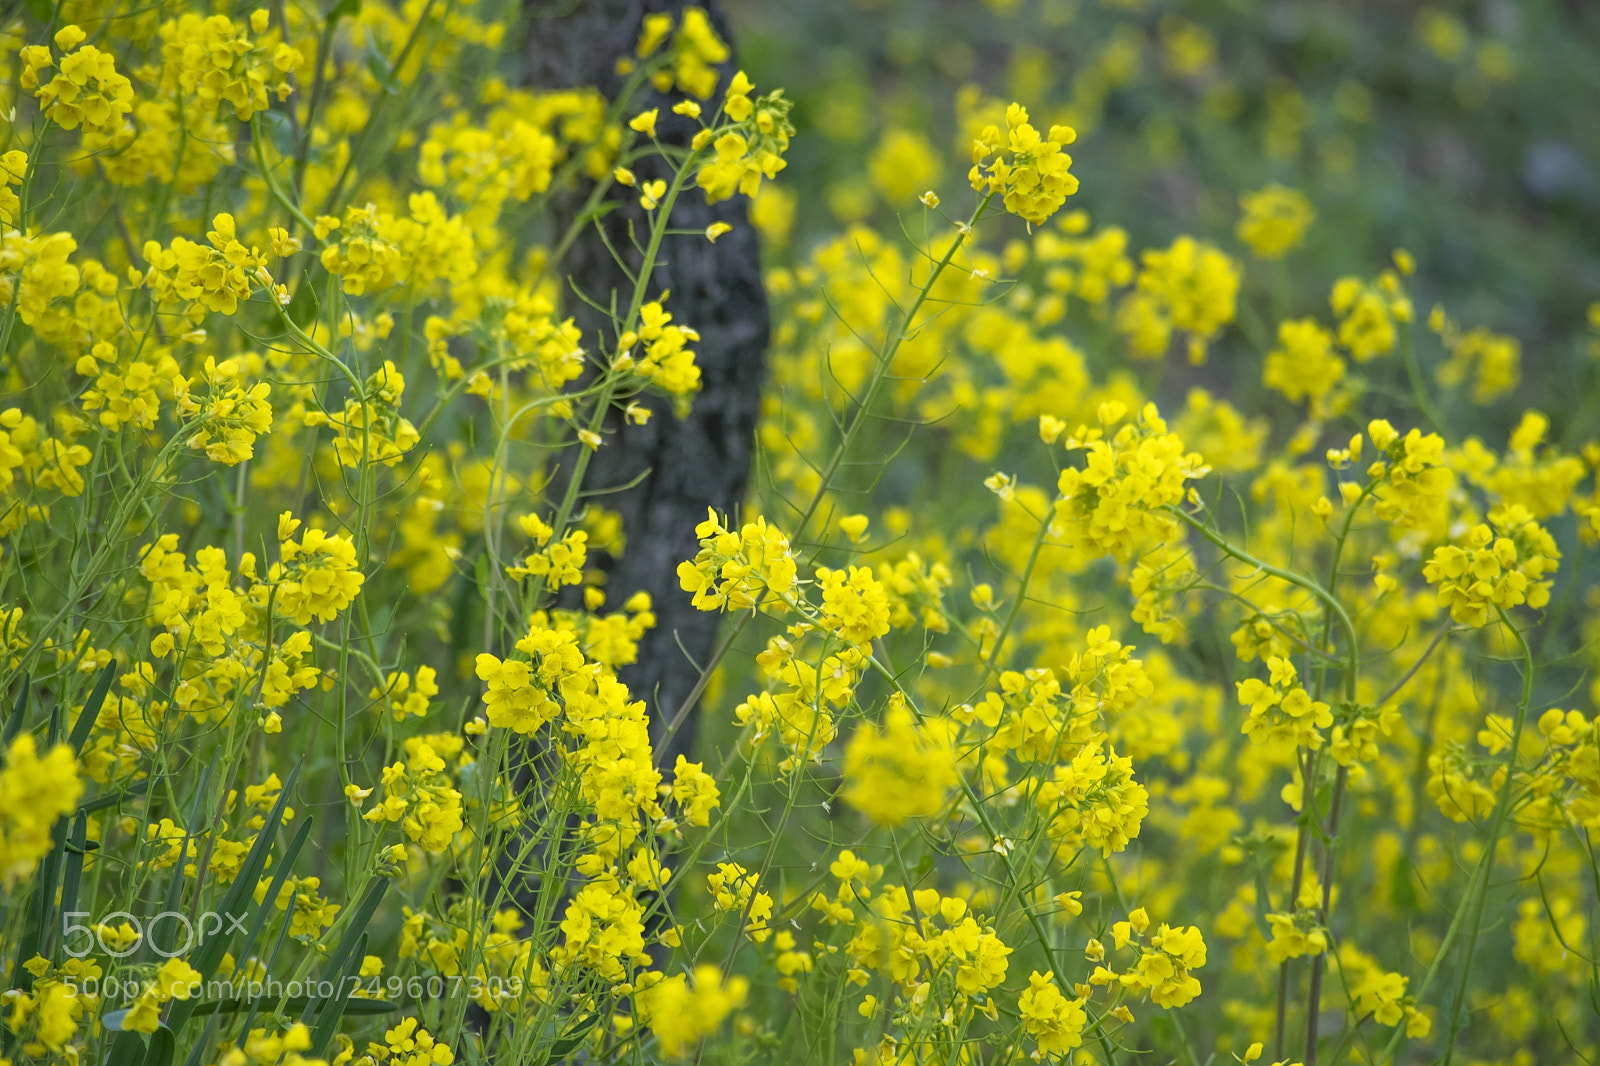 Sony a7 II sample photo. The canola flower is photography